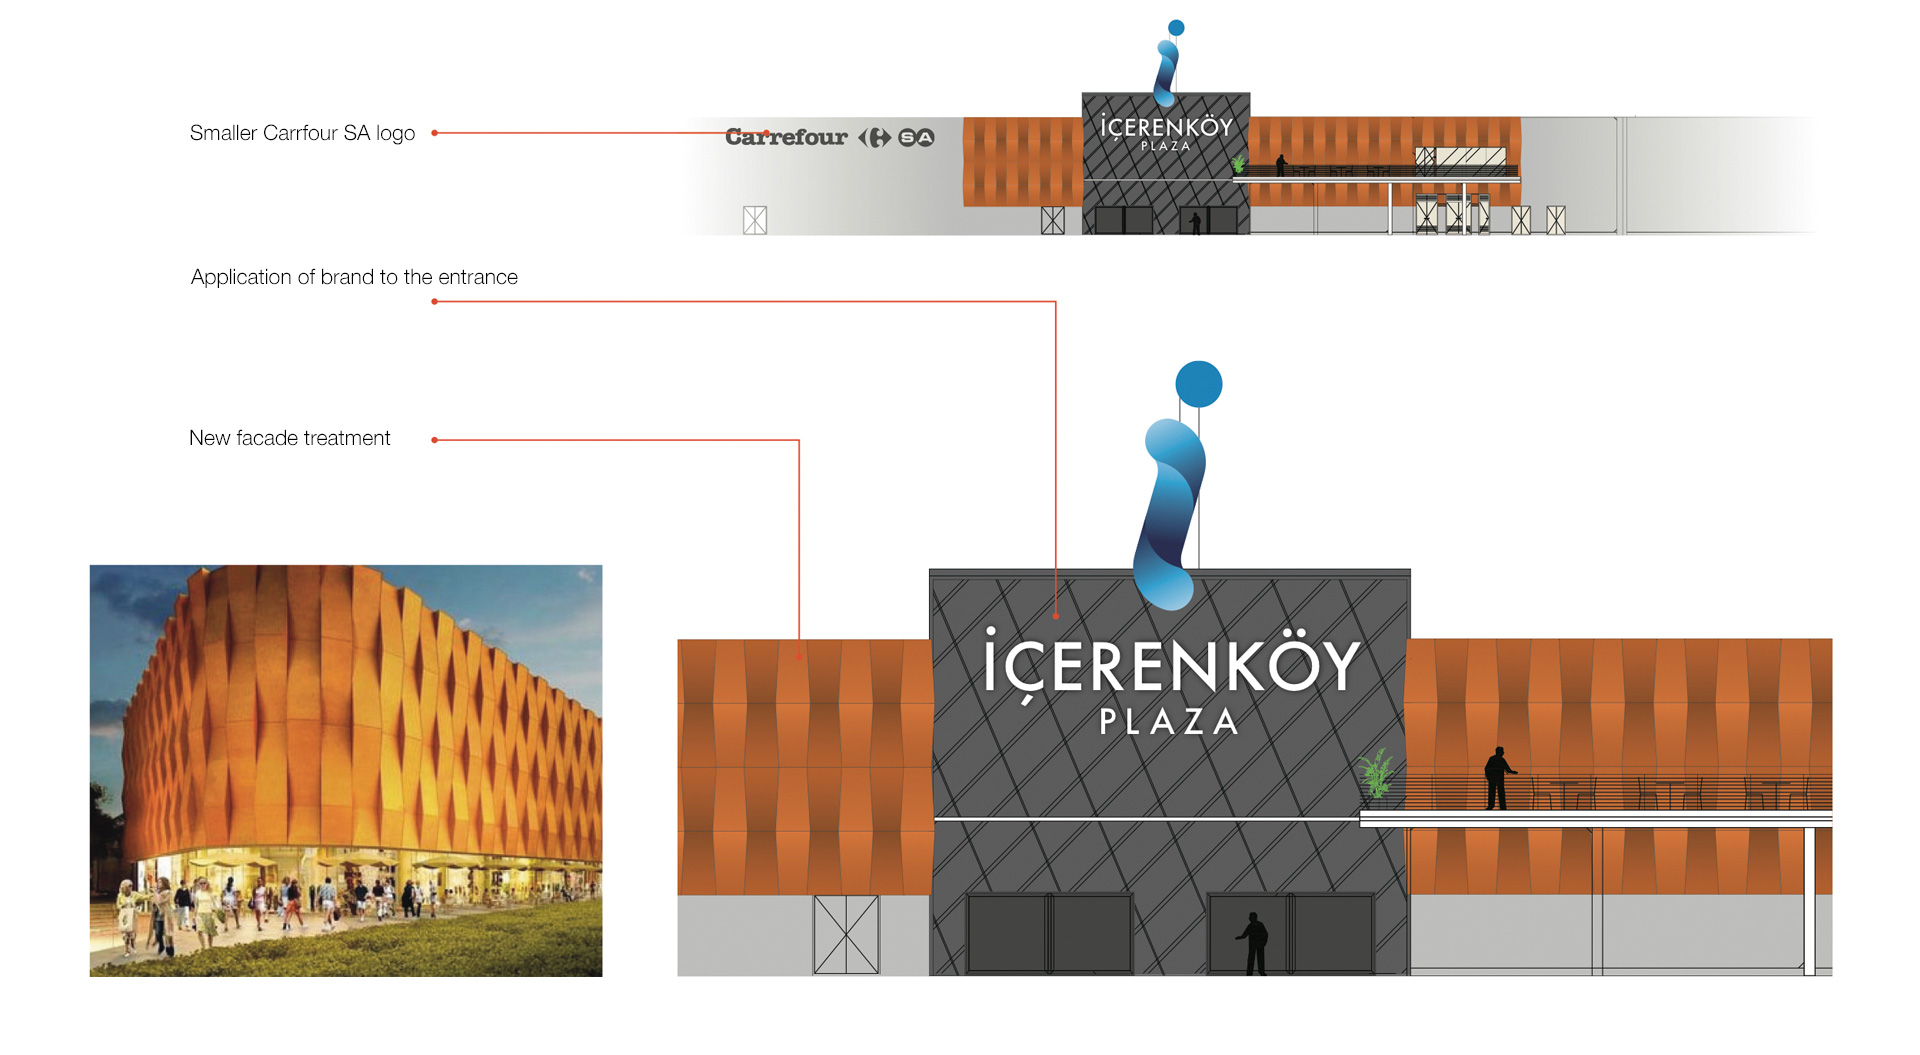 Icerenkoy shopping mall Istanbul proposed facade and branding